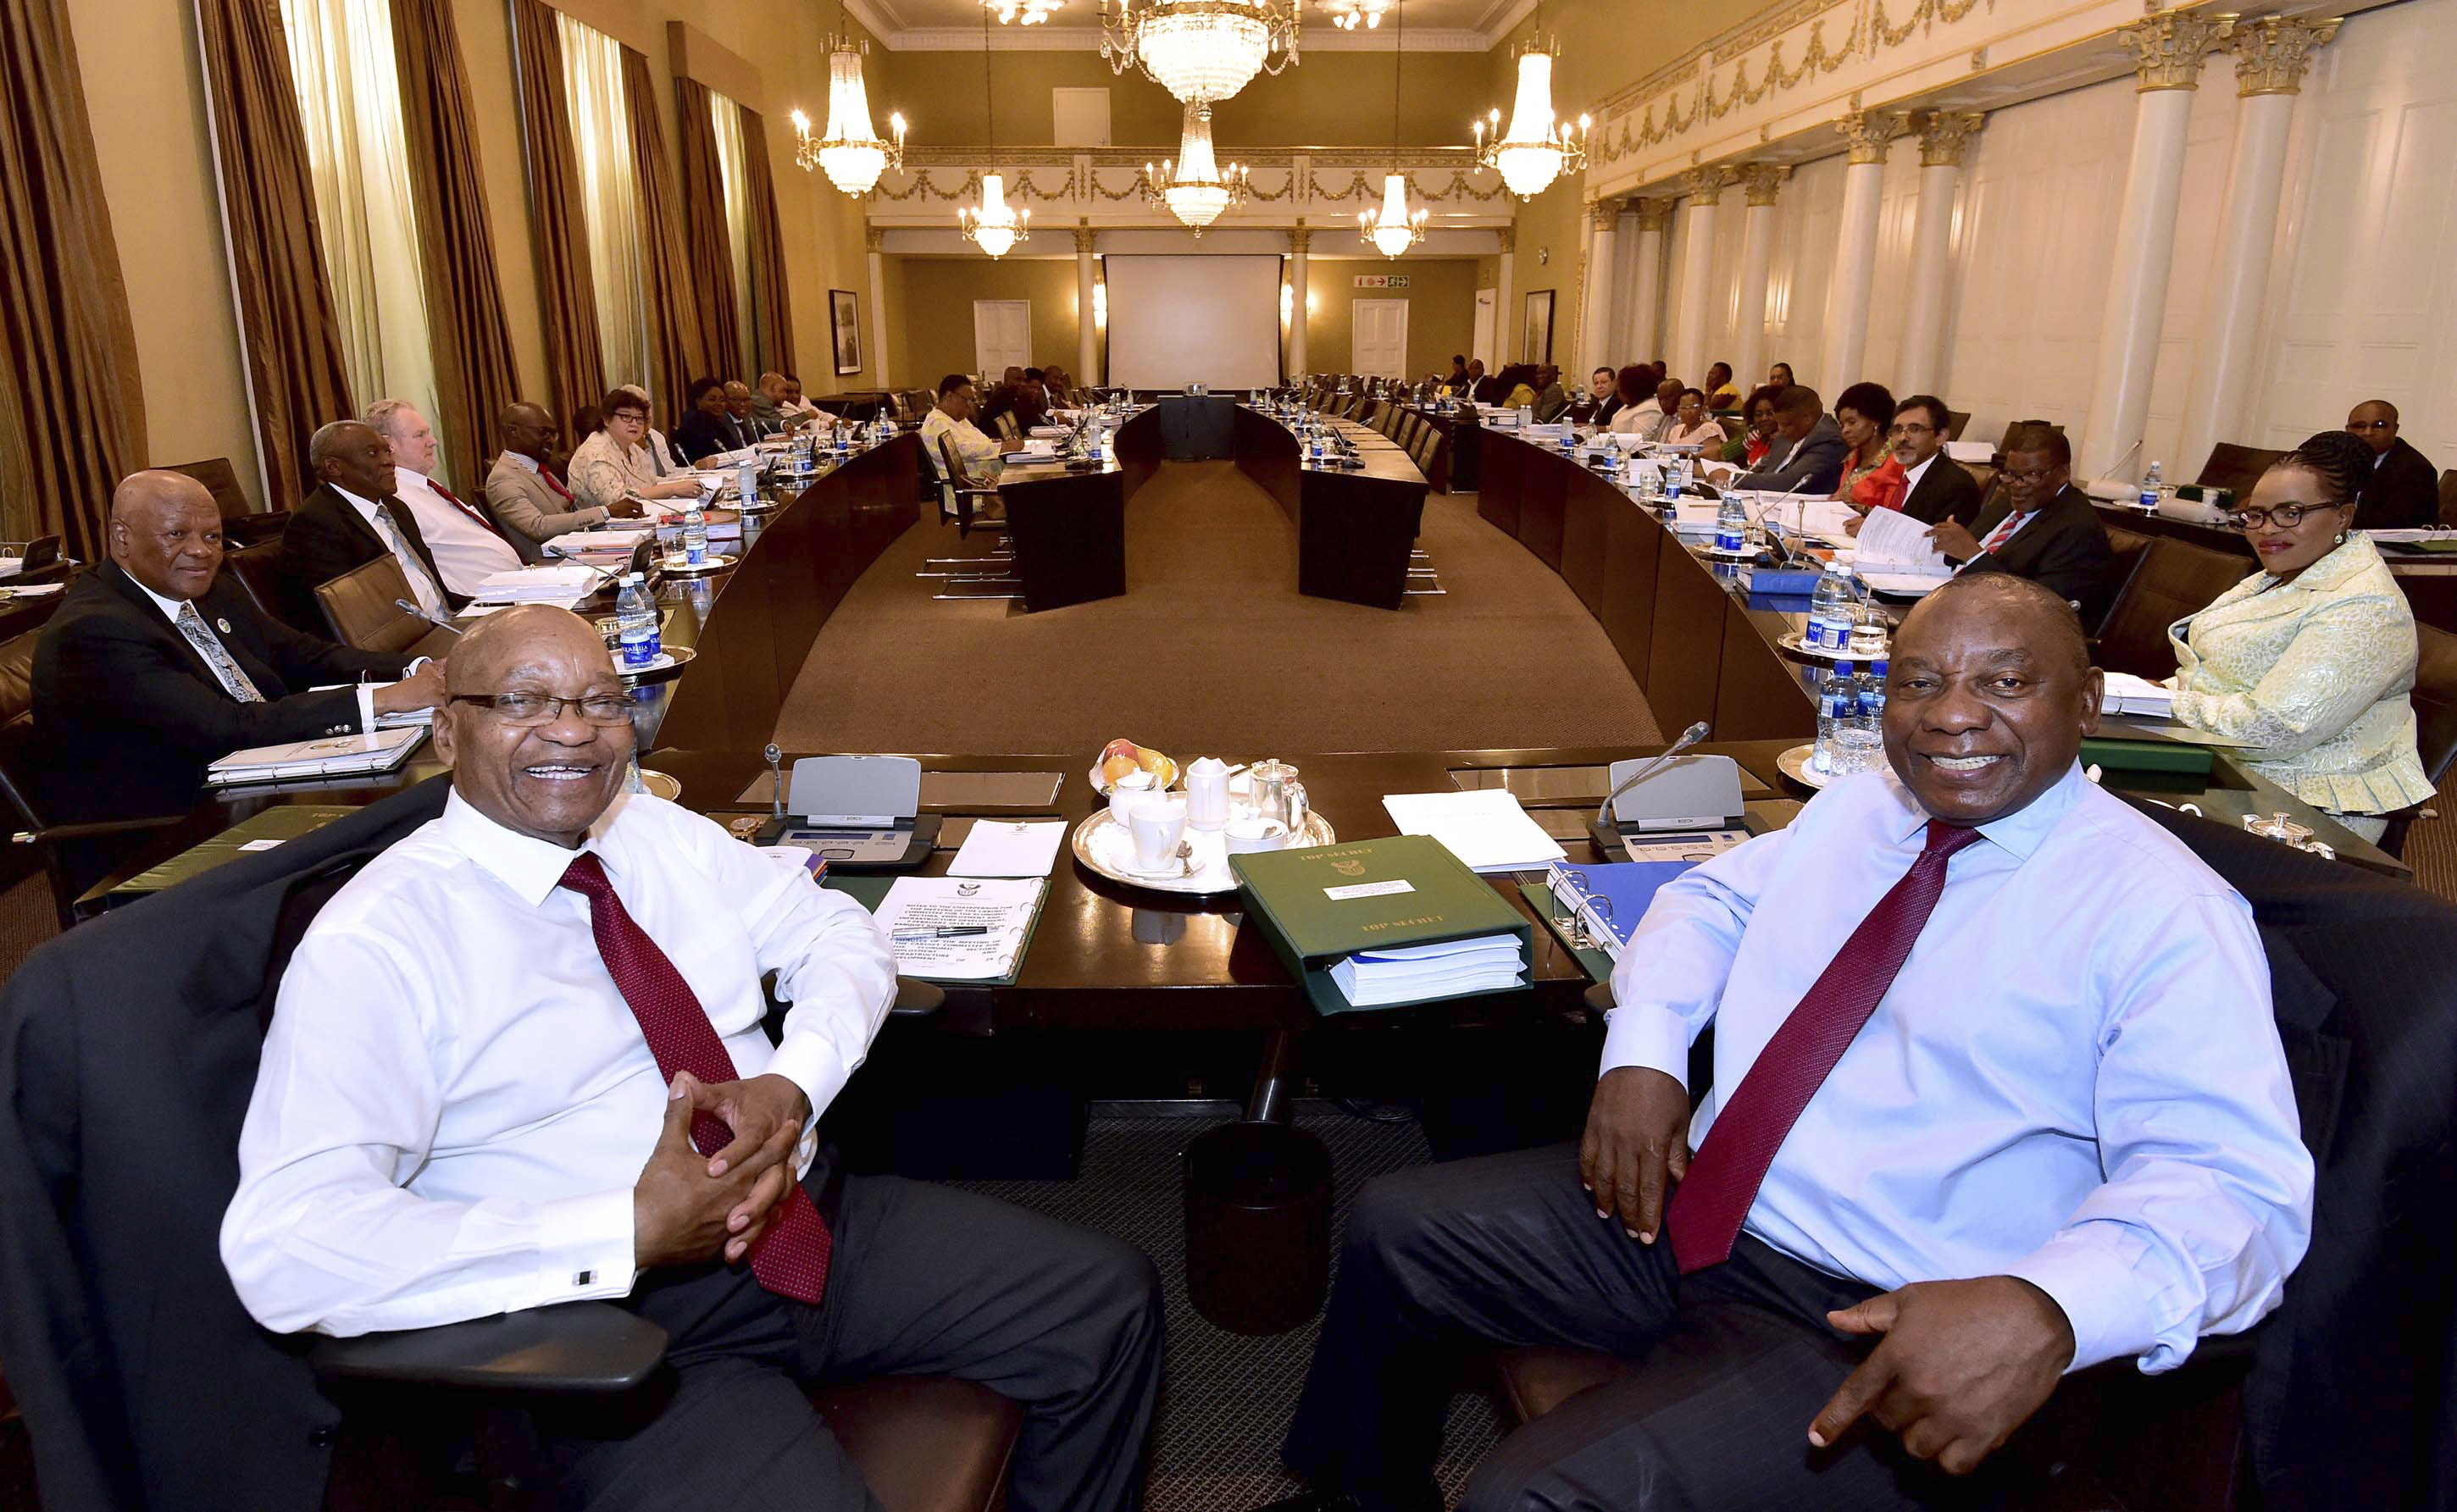 Former president Jacob Zuma, left, and then Deputy President Cyril Ramaphosa, right, with minsters and deputy ministers at a scheduled routine meeting of Cabinet Committees at parliament in Cape Town, South Africa, Feb. 7, 2018. (South African Government Communication and Information Services)